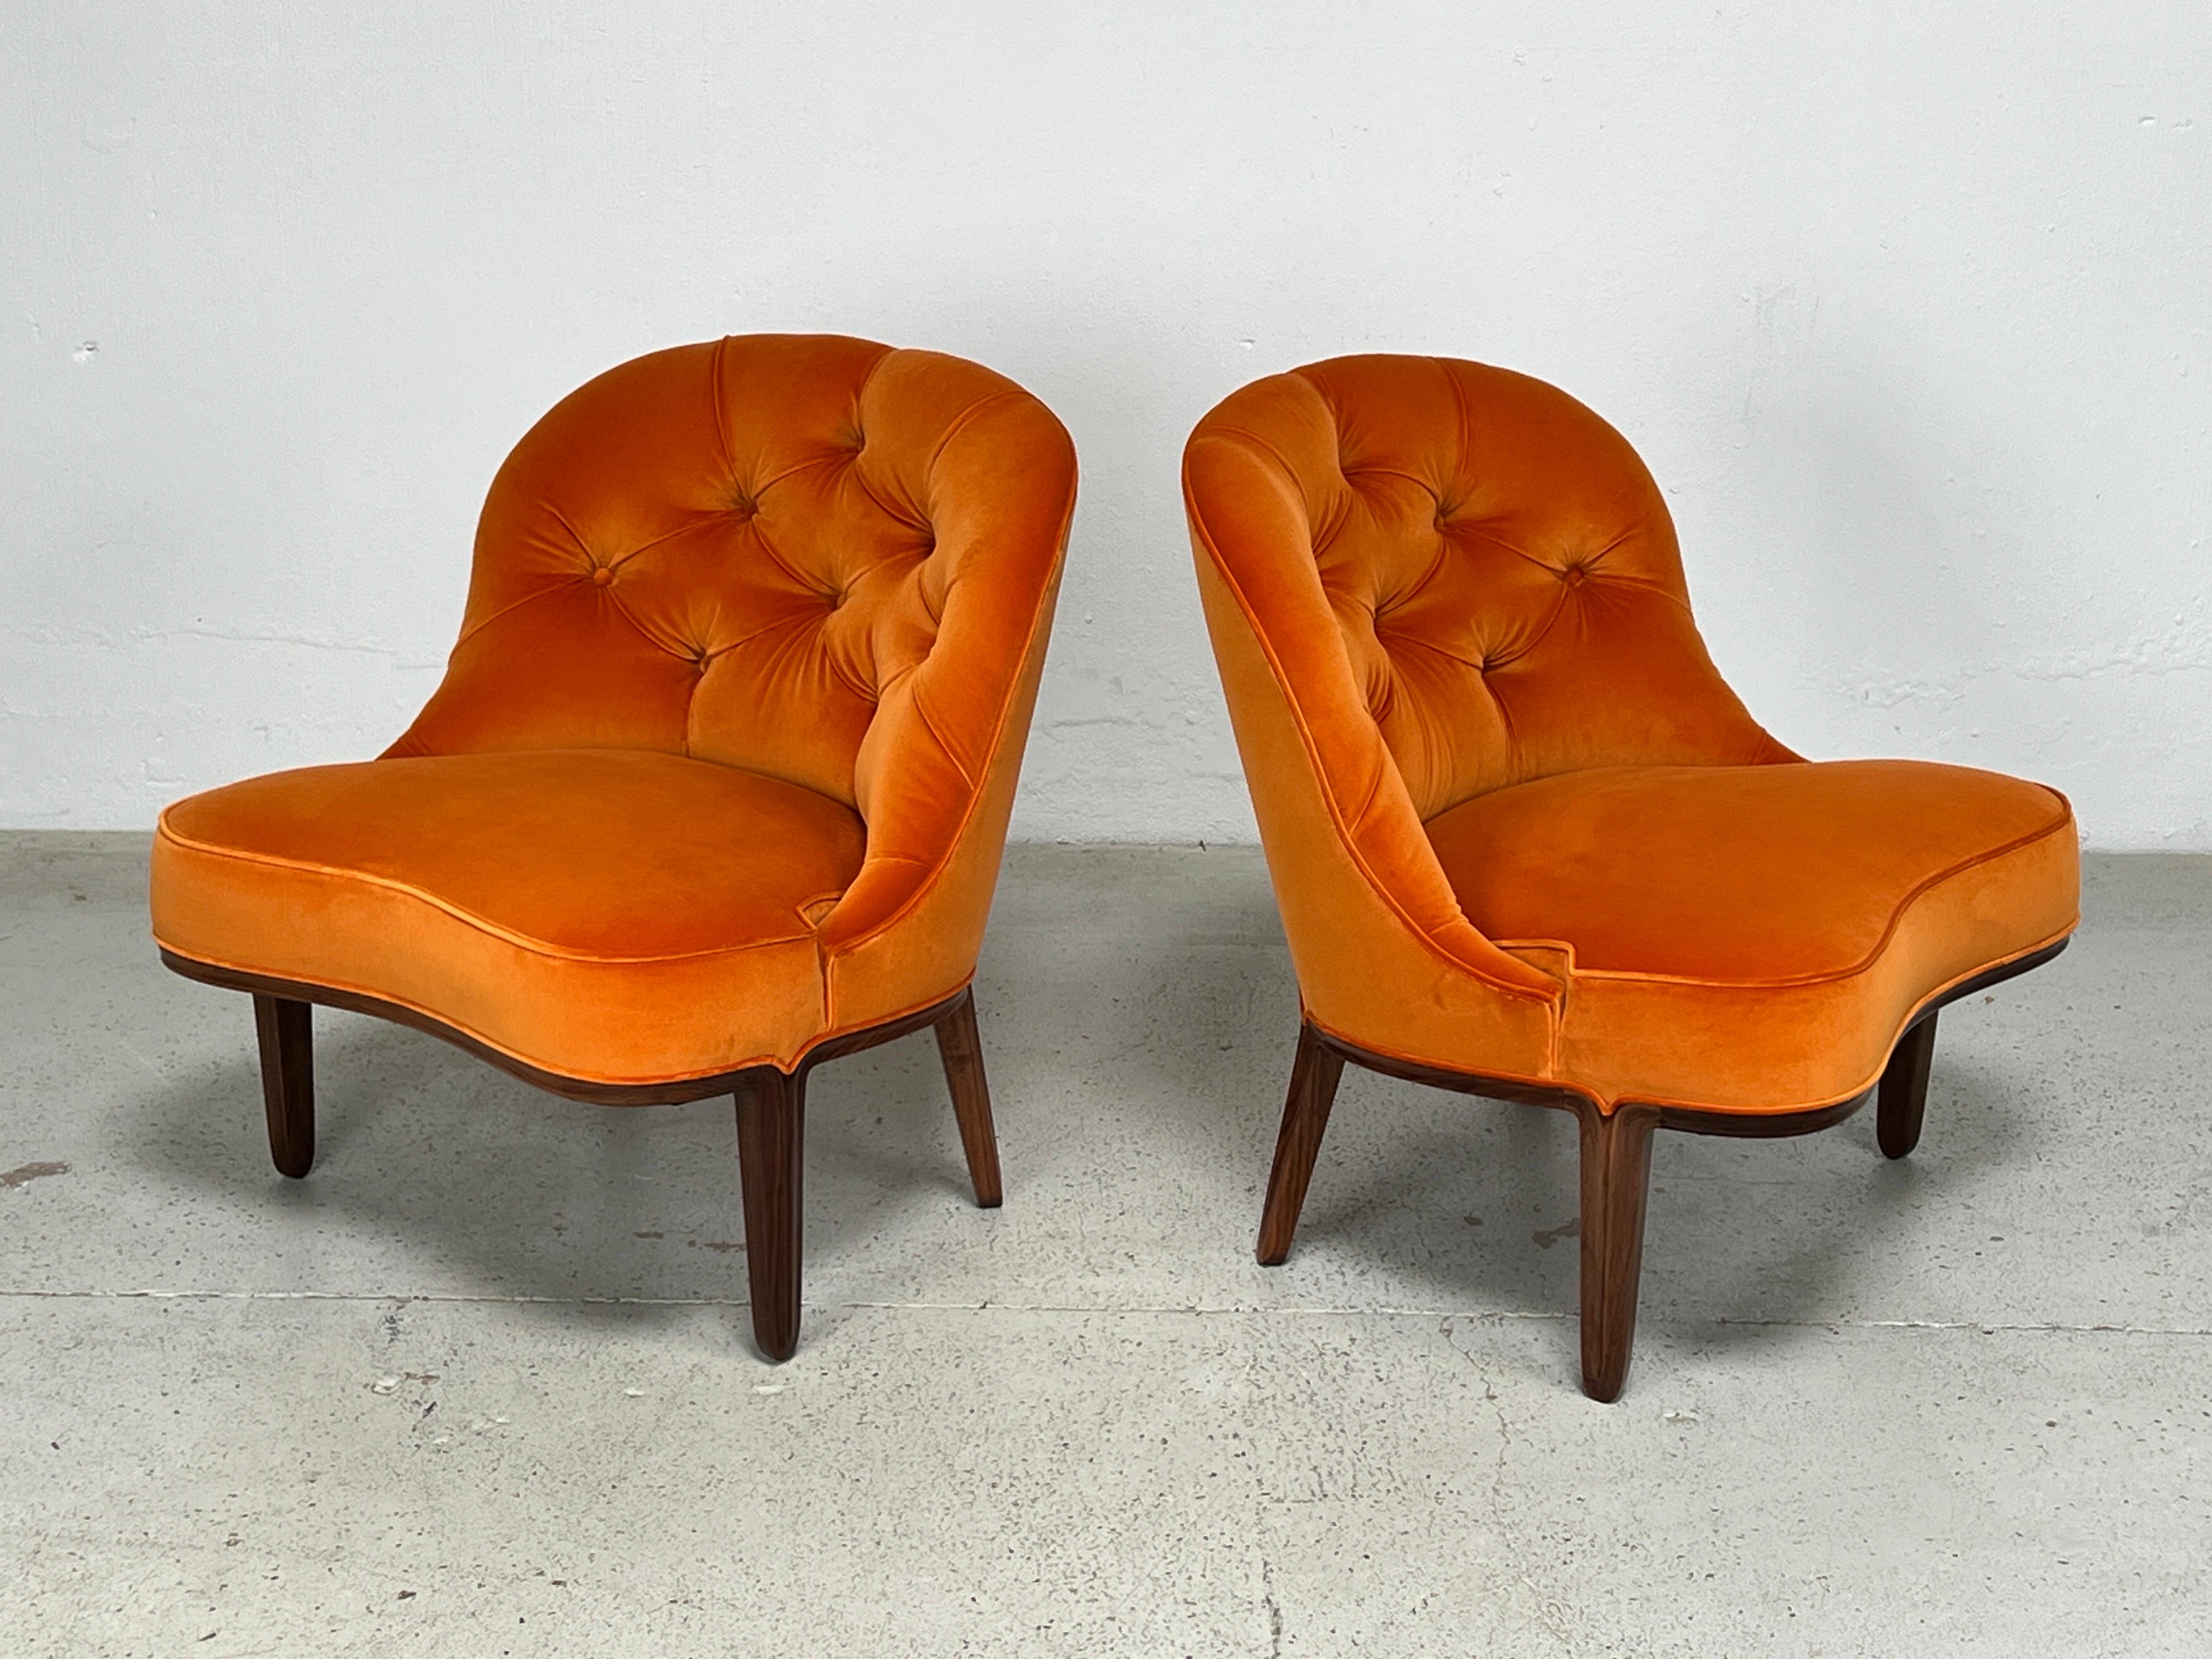 A beautifully restored pair of Janus slipper chairs with walnut frames and orange velvet upholstery. Designed by Edward Wormley for Dunbar.